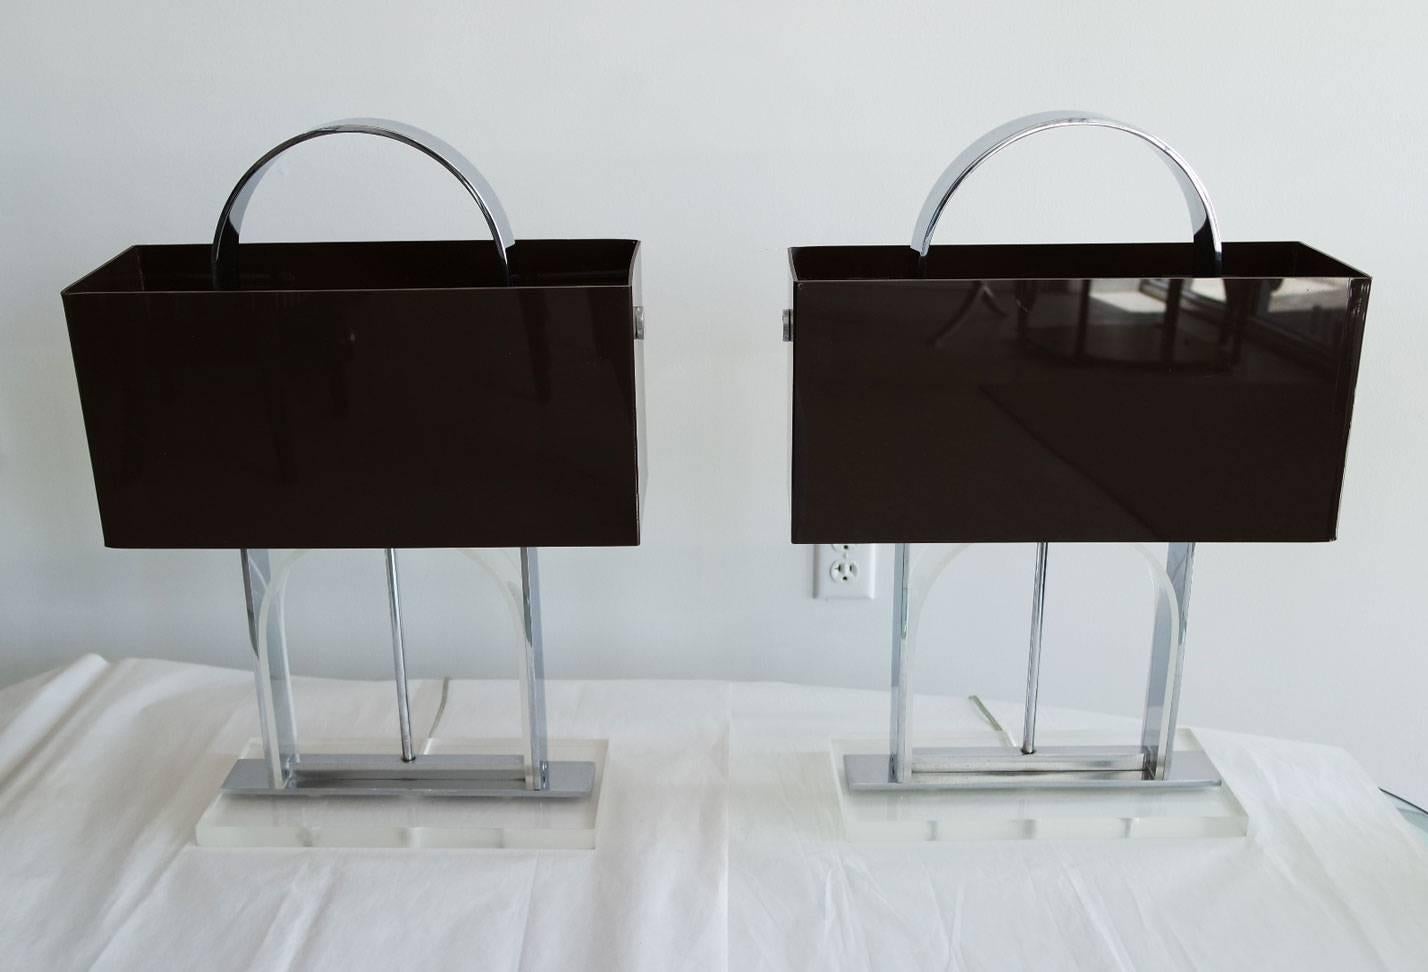 Pair of clear Lucite and nickel lamps with dark brown Lucite shades in the style of Pierre Cardin.

Base measurements: 13